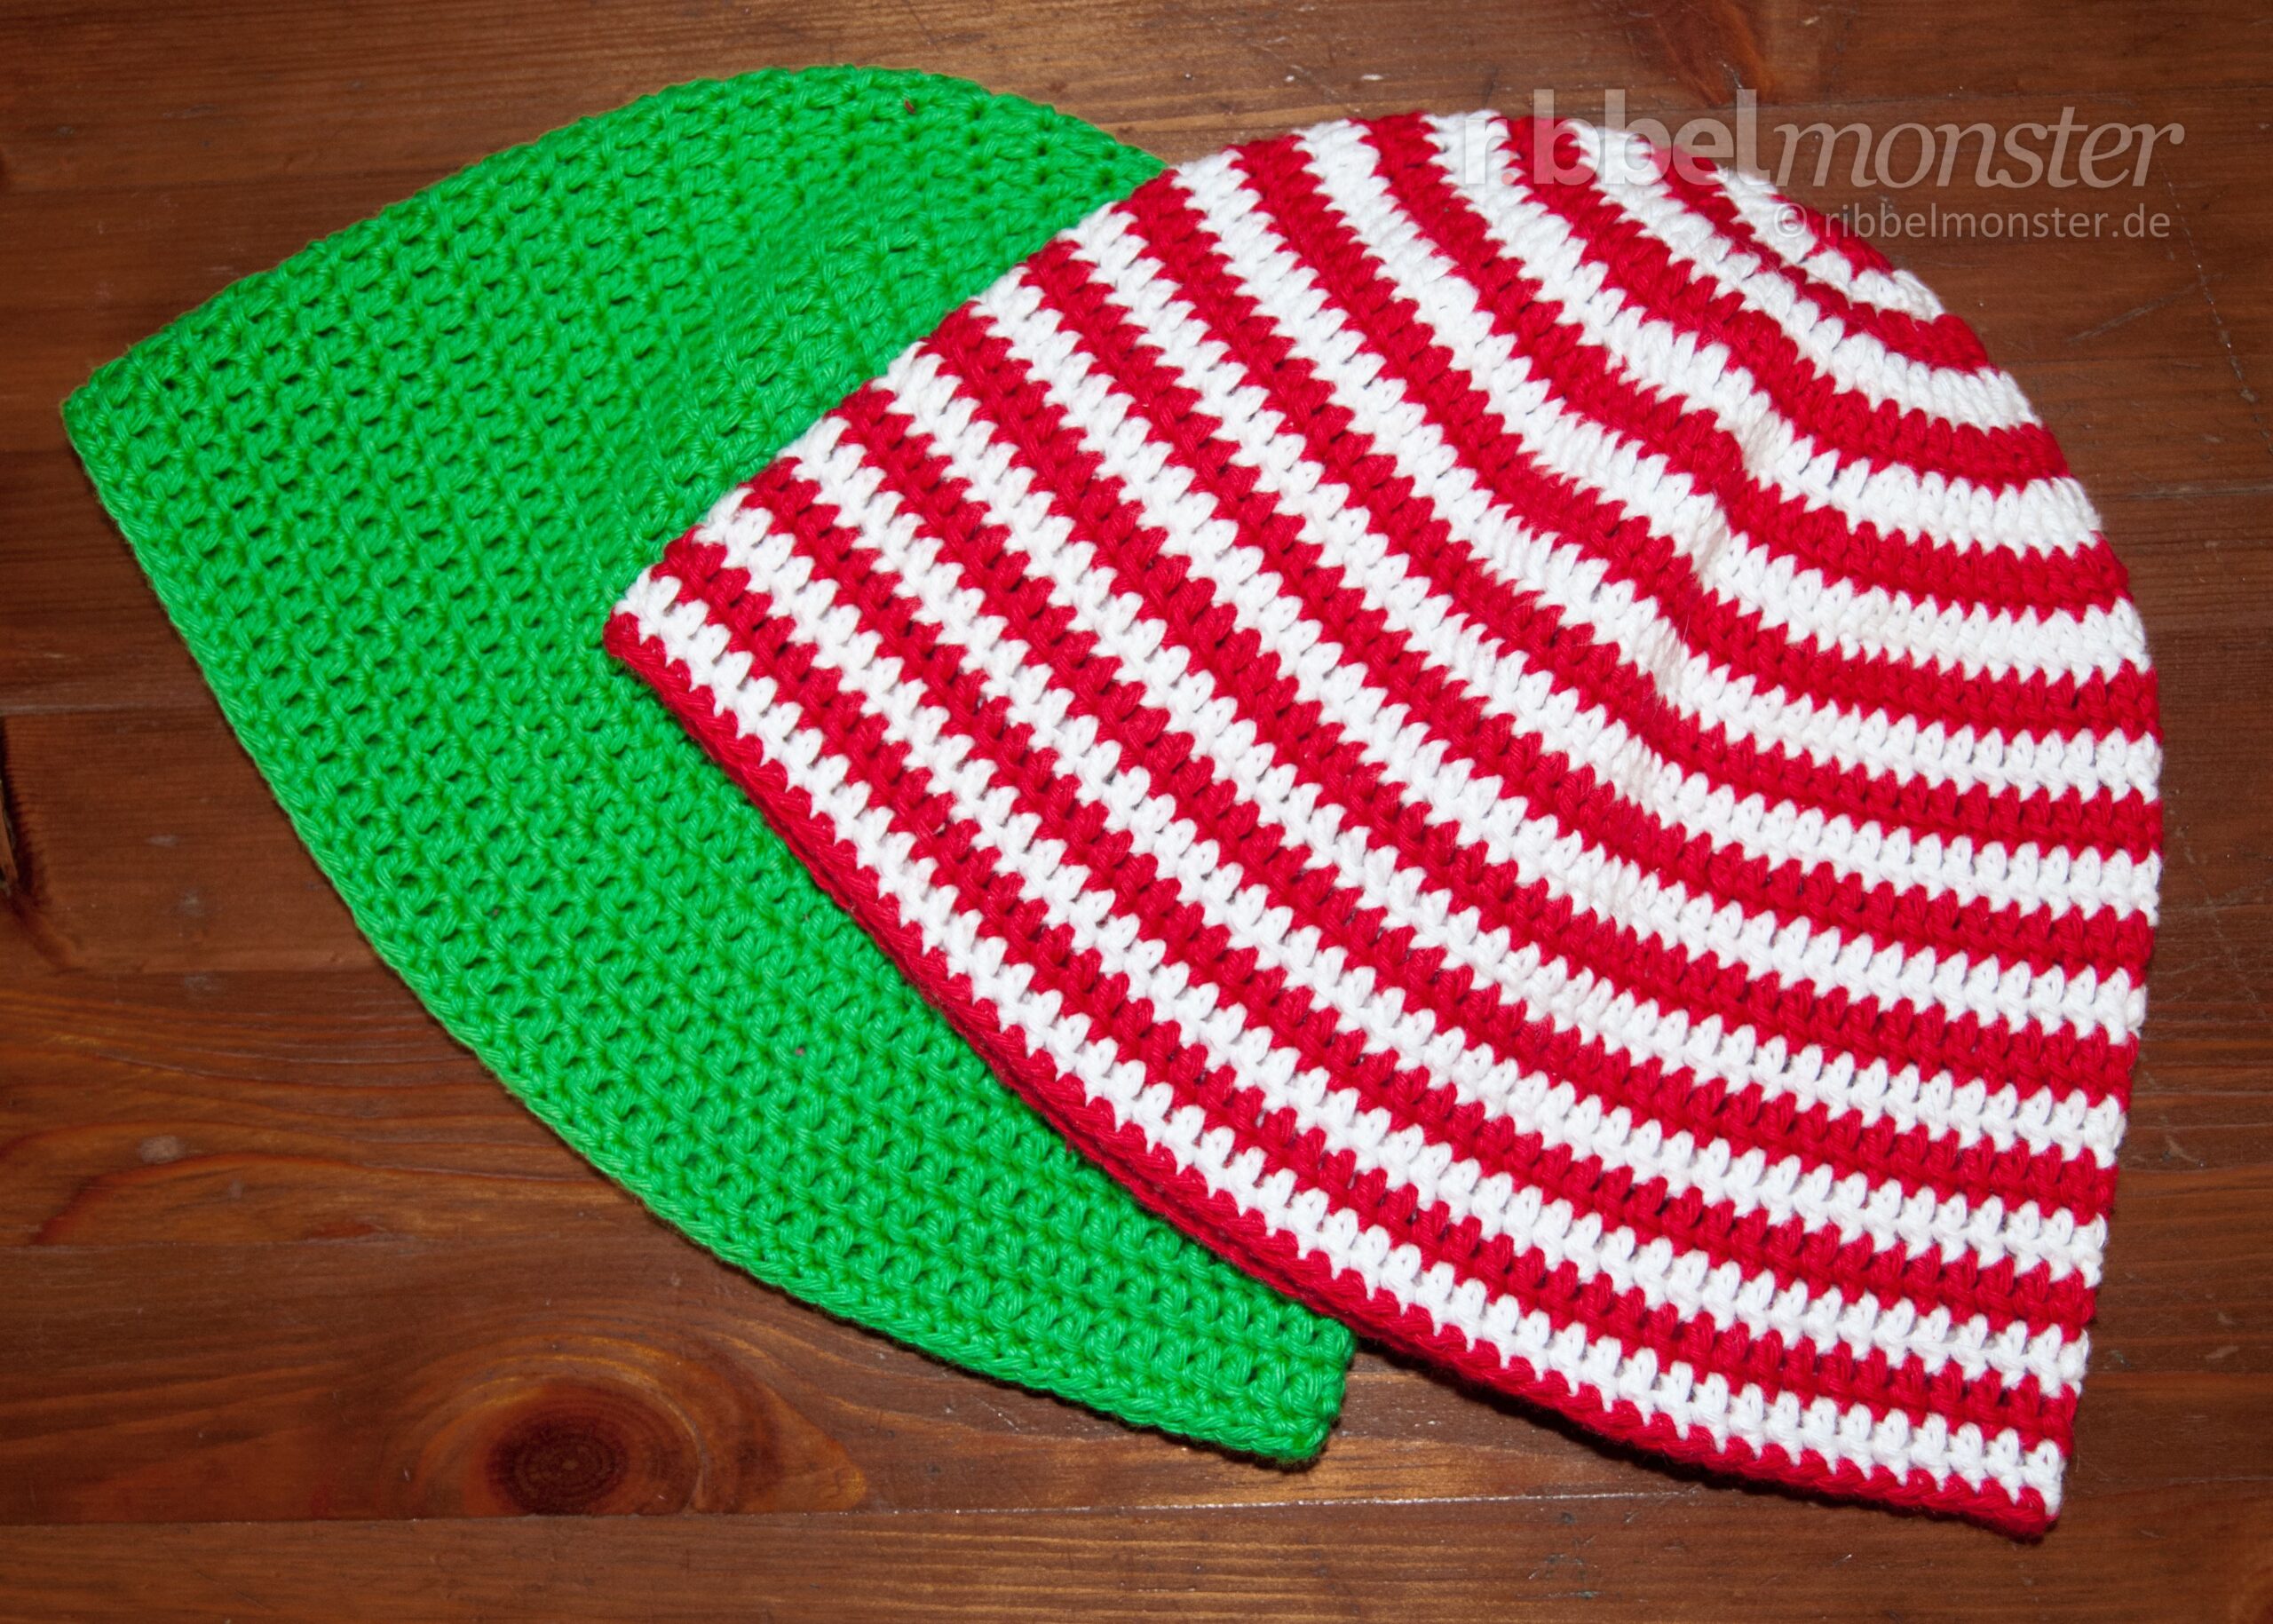 Crochet Hat – Beanie with Double Crochet Stitches